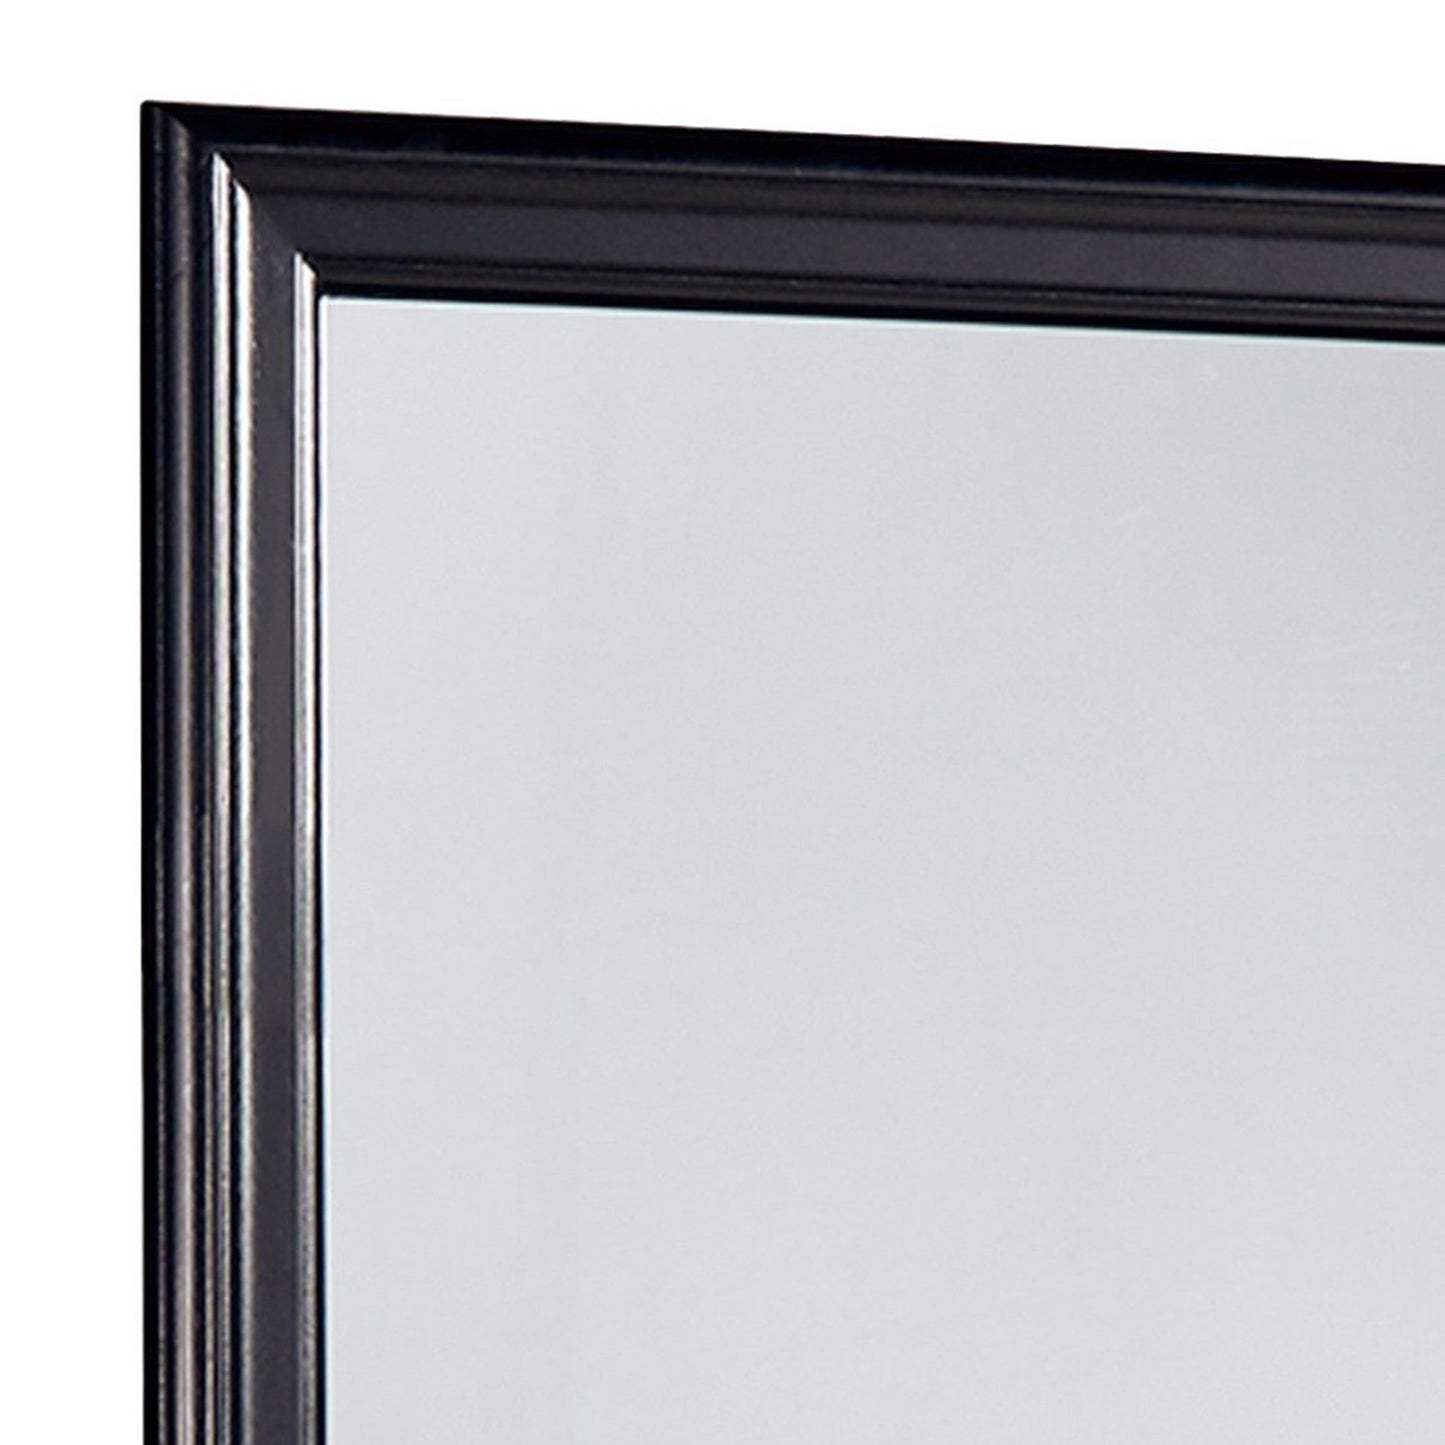 Benzara Black and Silver Wooden Frame Mirror With Mounting Hardware